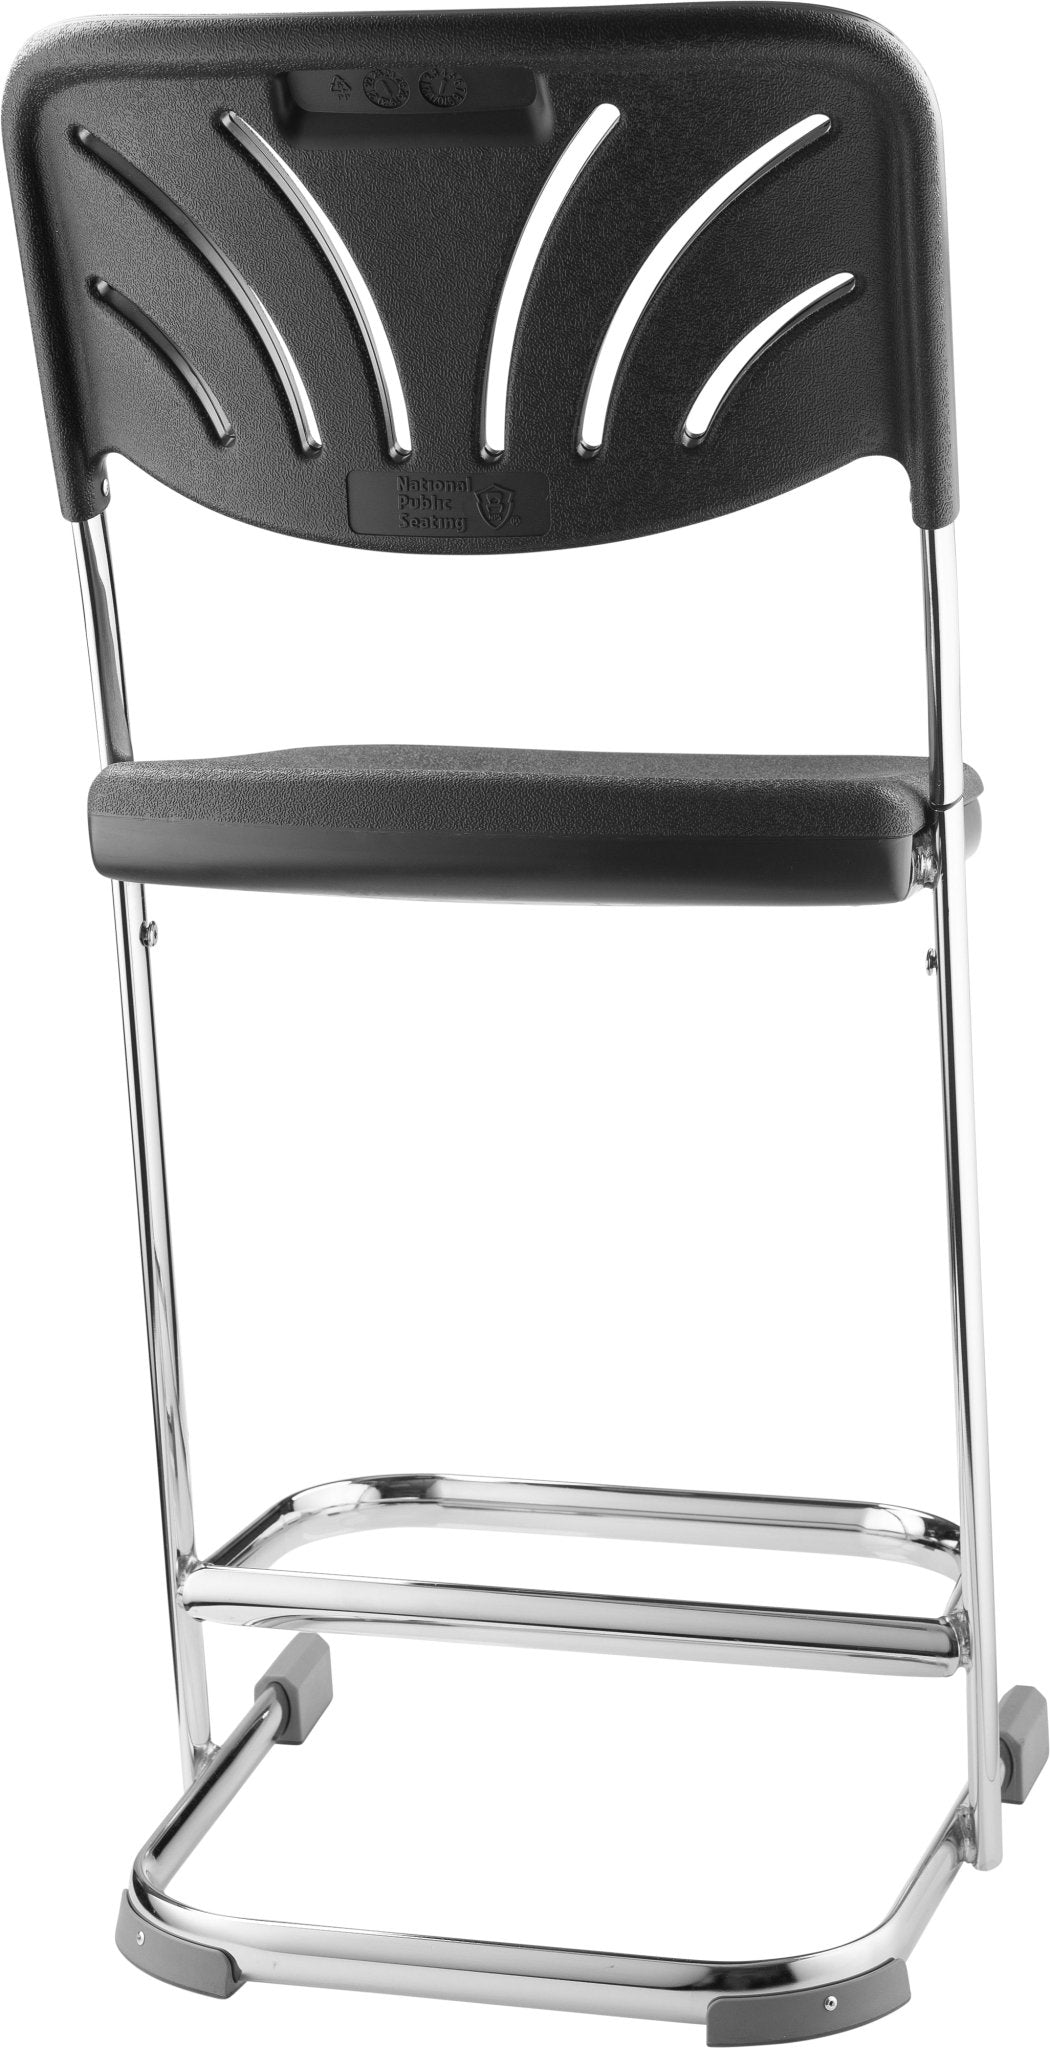 NPS Elephant Z-stool 22" H Stool with Blow Molded Seat and Backrest (National Public Seating NPS-6622B) - SchoolOutlet